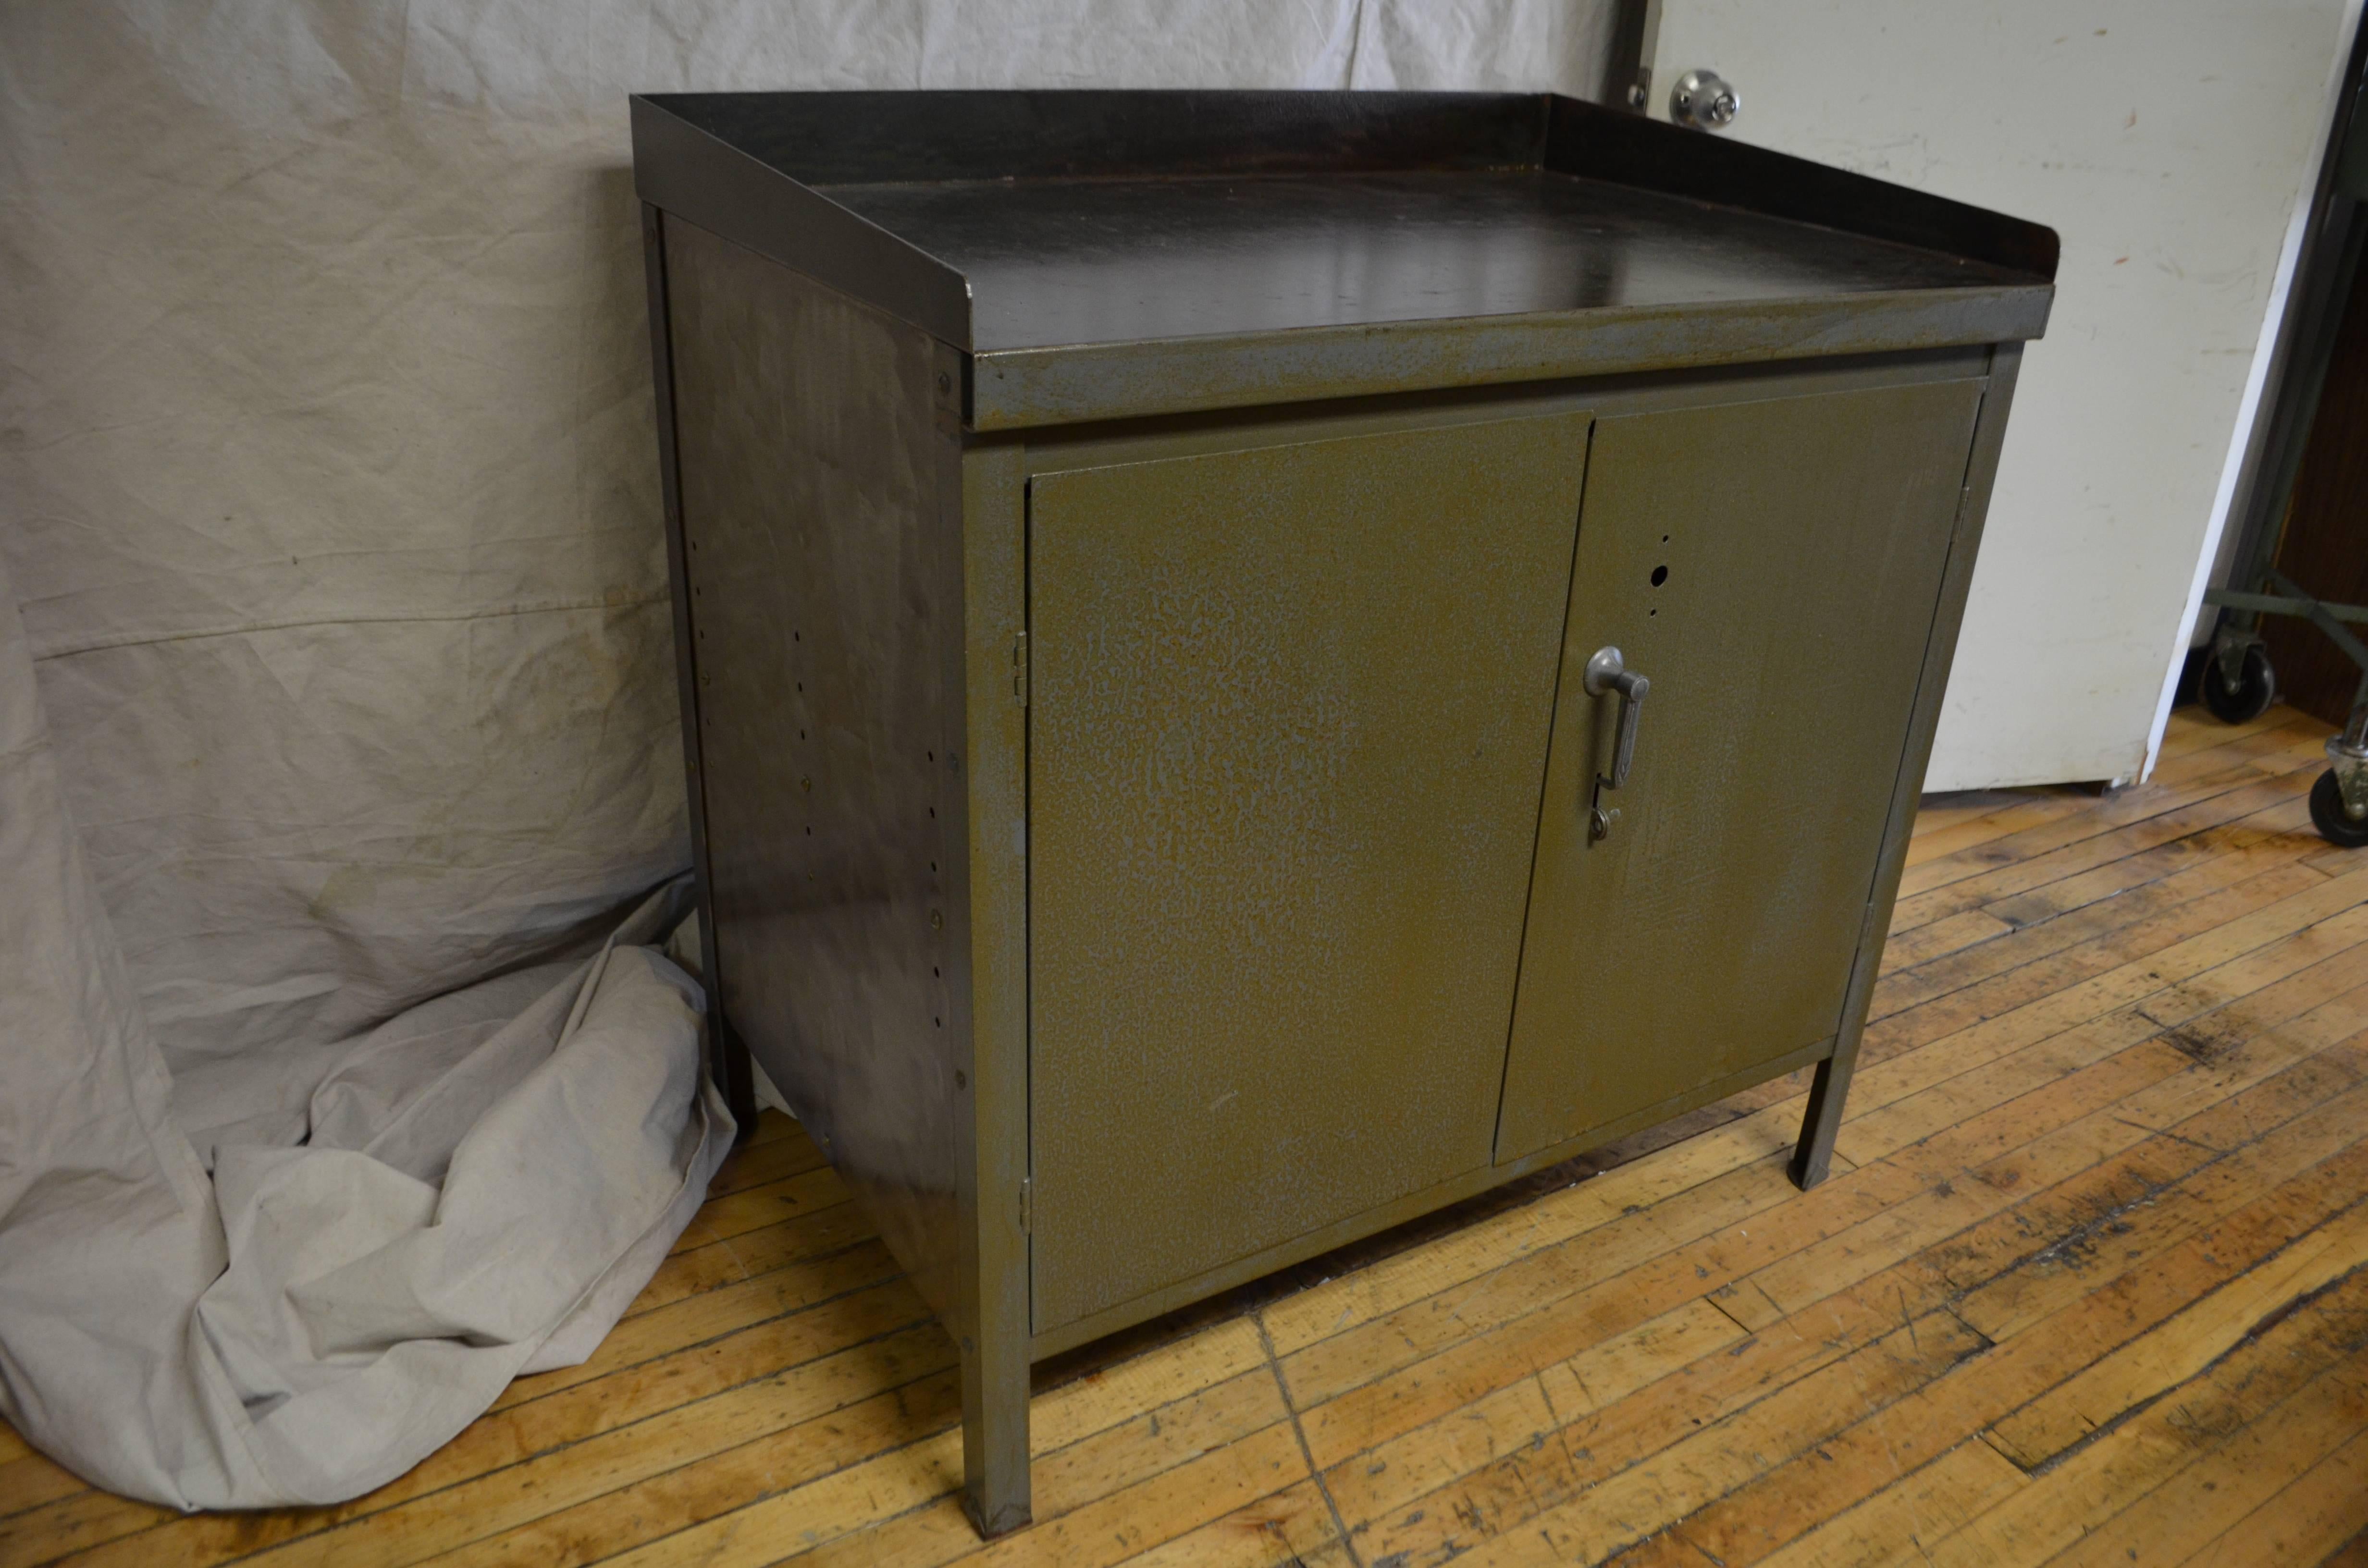 Industrial steel cabinet with two doors and two shelves within. Cleaned and sealed, leaving rust spots intact as character patina. Love that factory green with brown undertones. Note different colored paint on back and unpainted side. Quite the